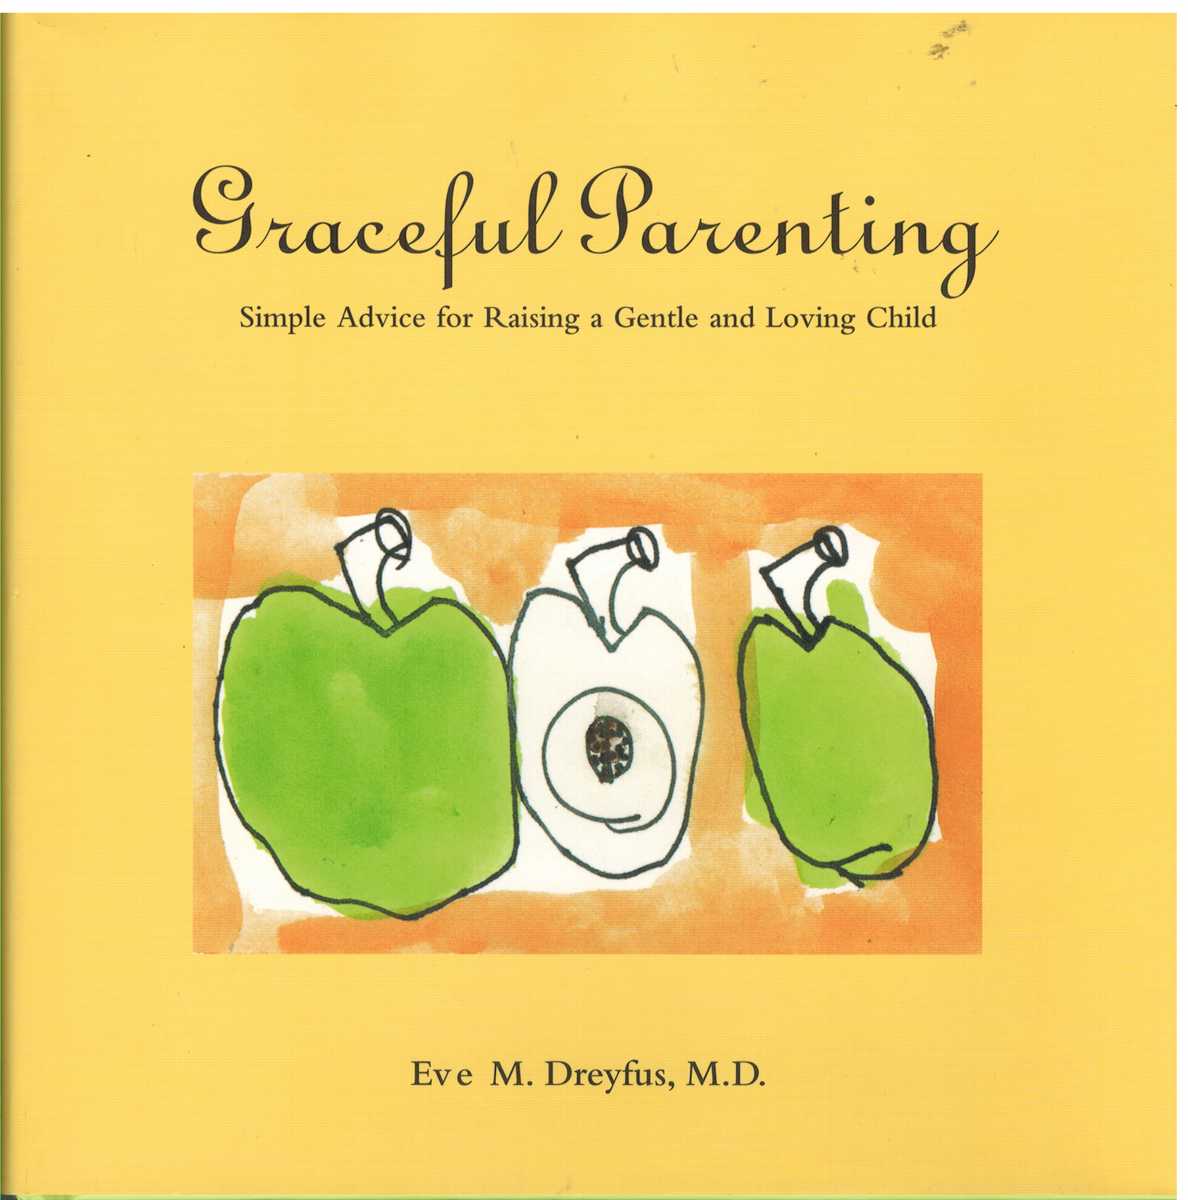 Dreyfus, Eve M. - GRACEFUL PARENTING Simple Advice for Raising a Gentle and Loving Child